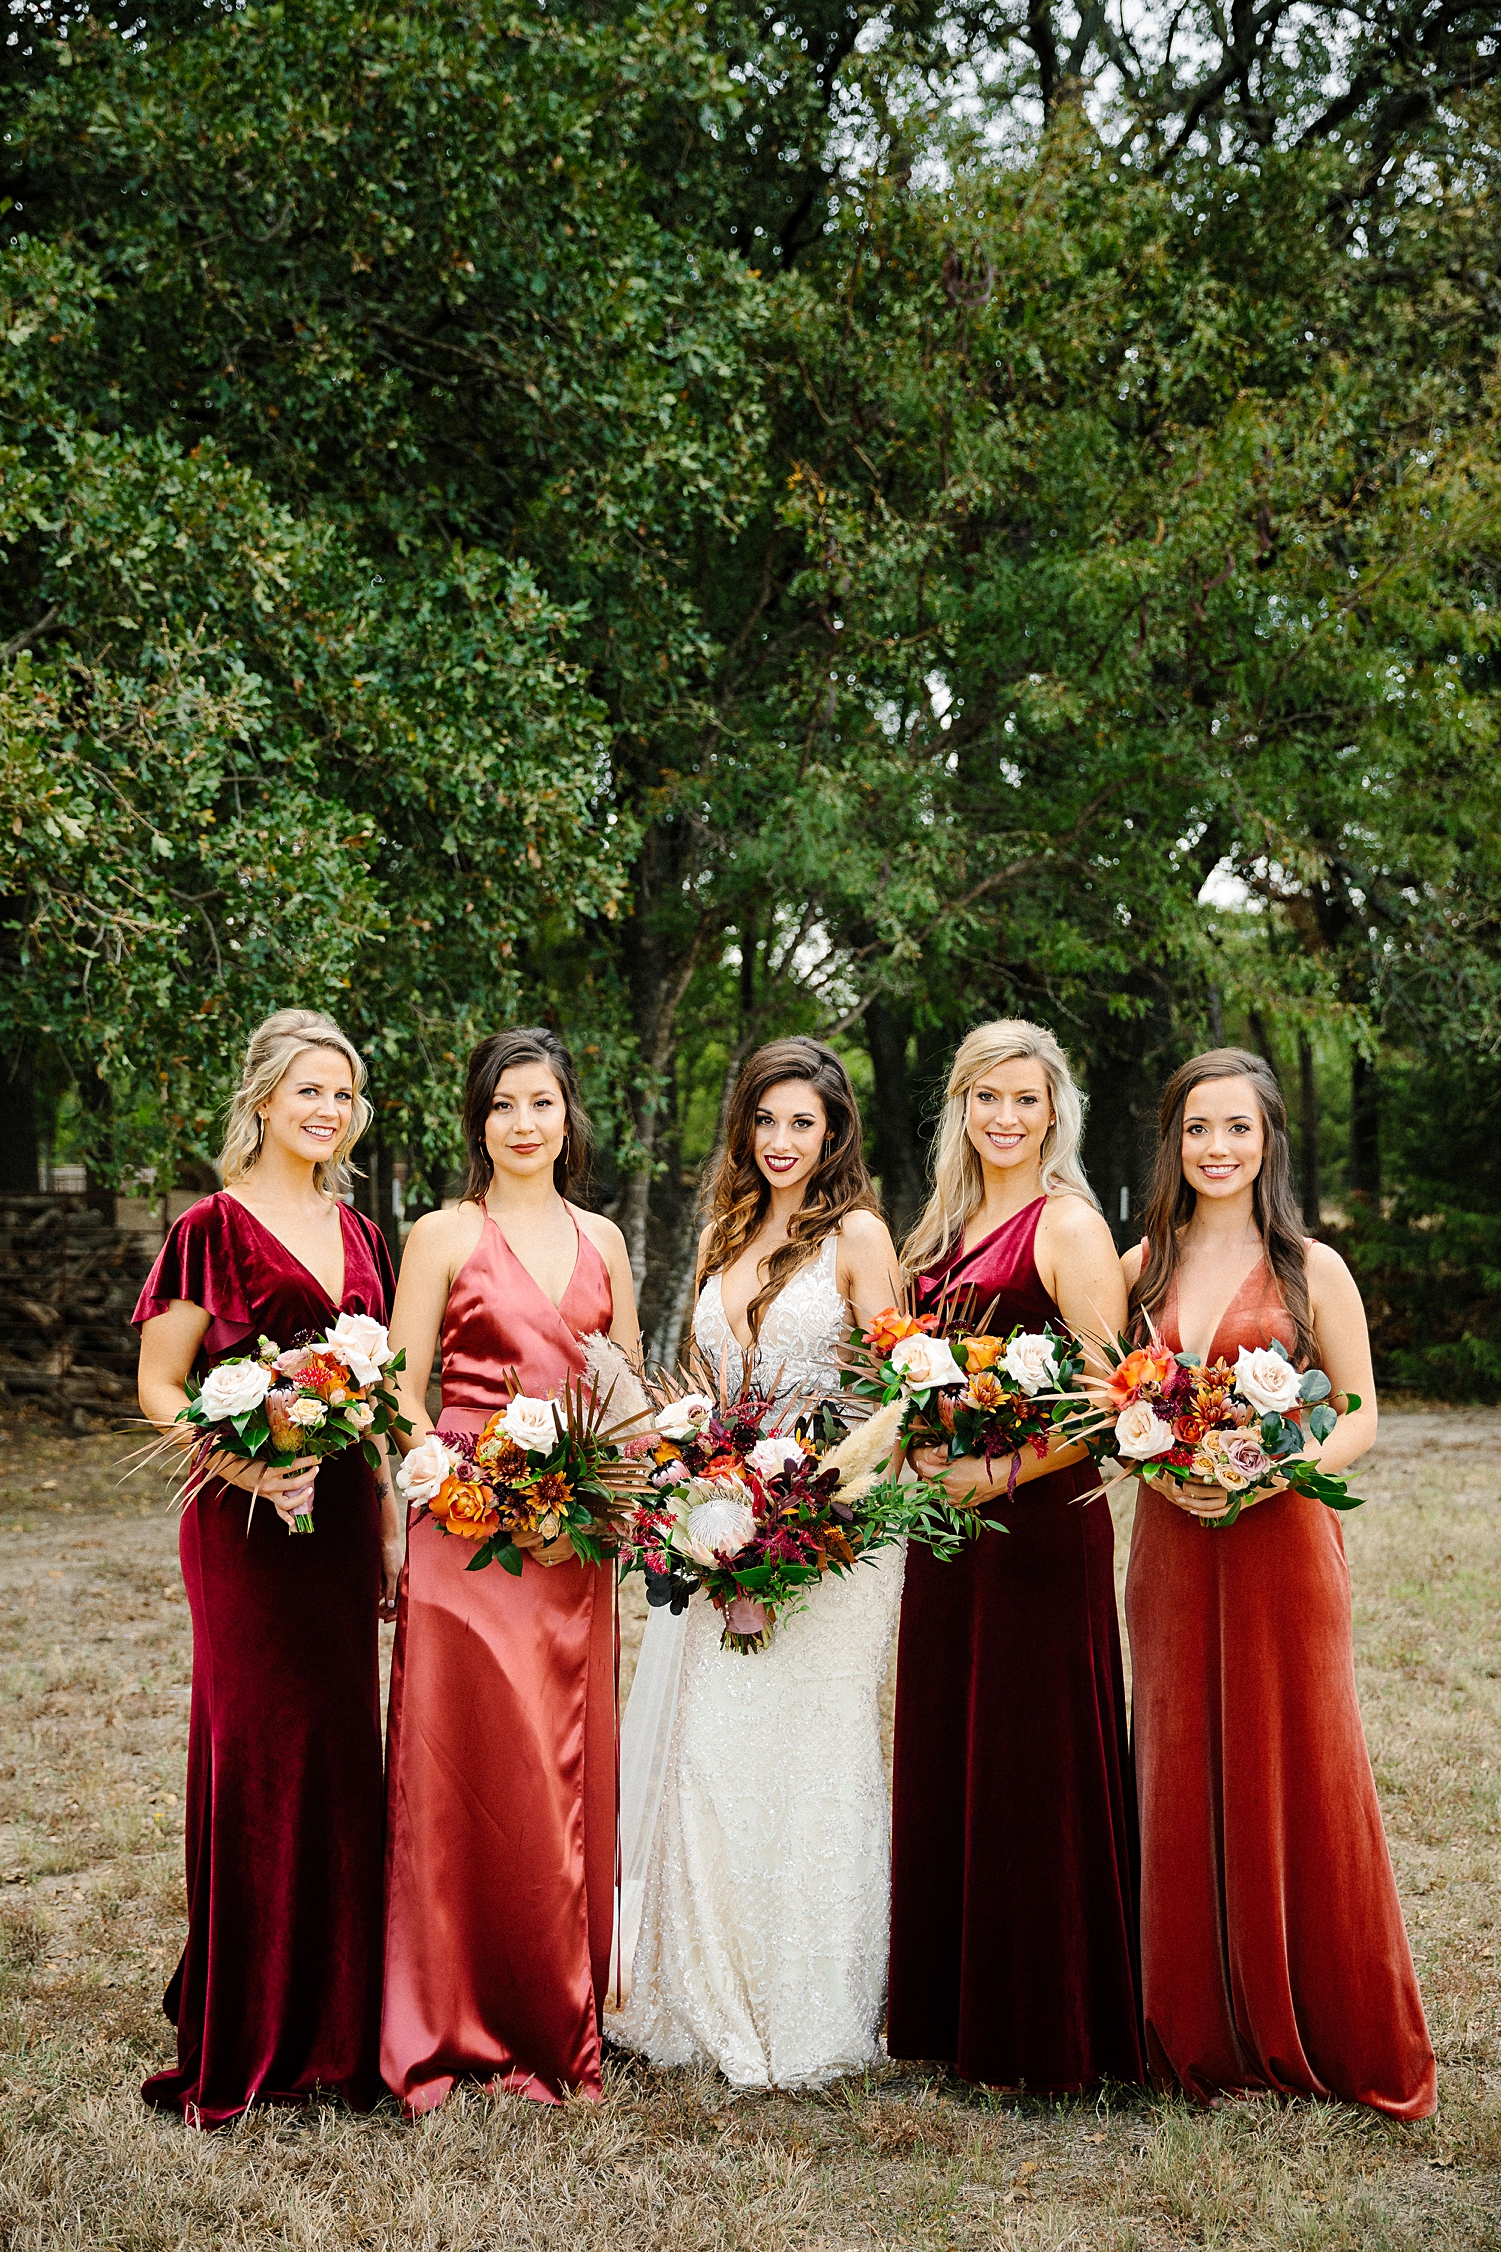 bride and bridesmaids in red dresses holding floral bouquets  standing in front of green trees